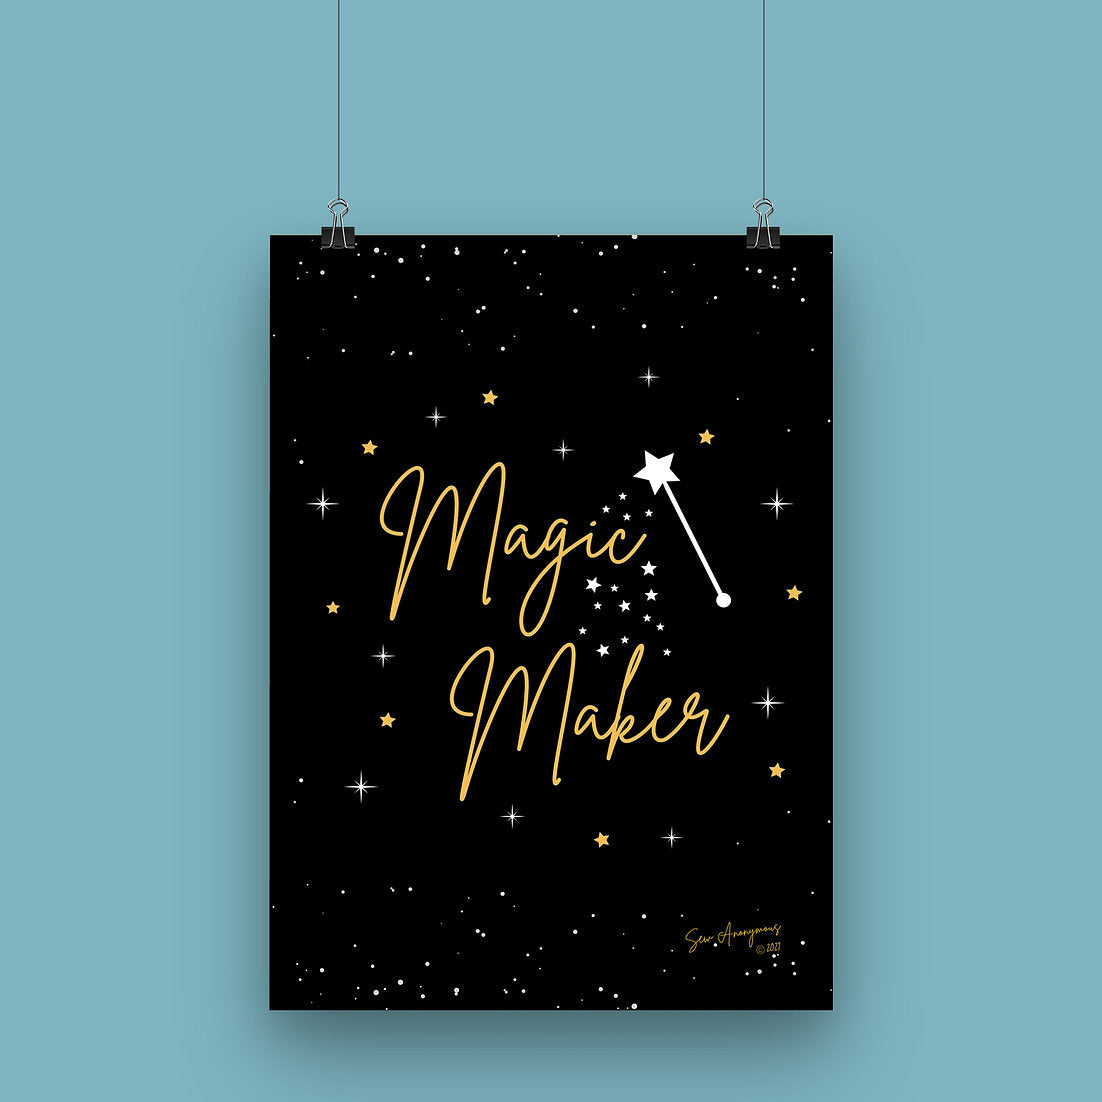 "MAGIC MAKER" Sewing Themed A4 Print - Sew Anonymous